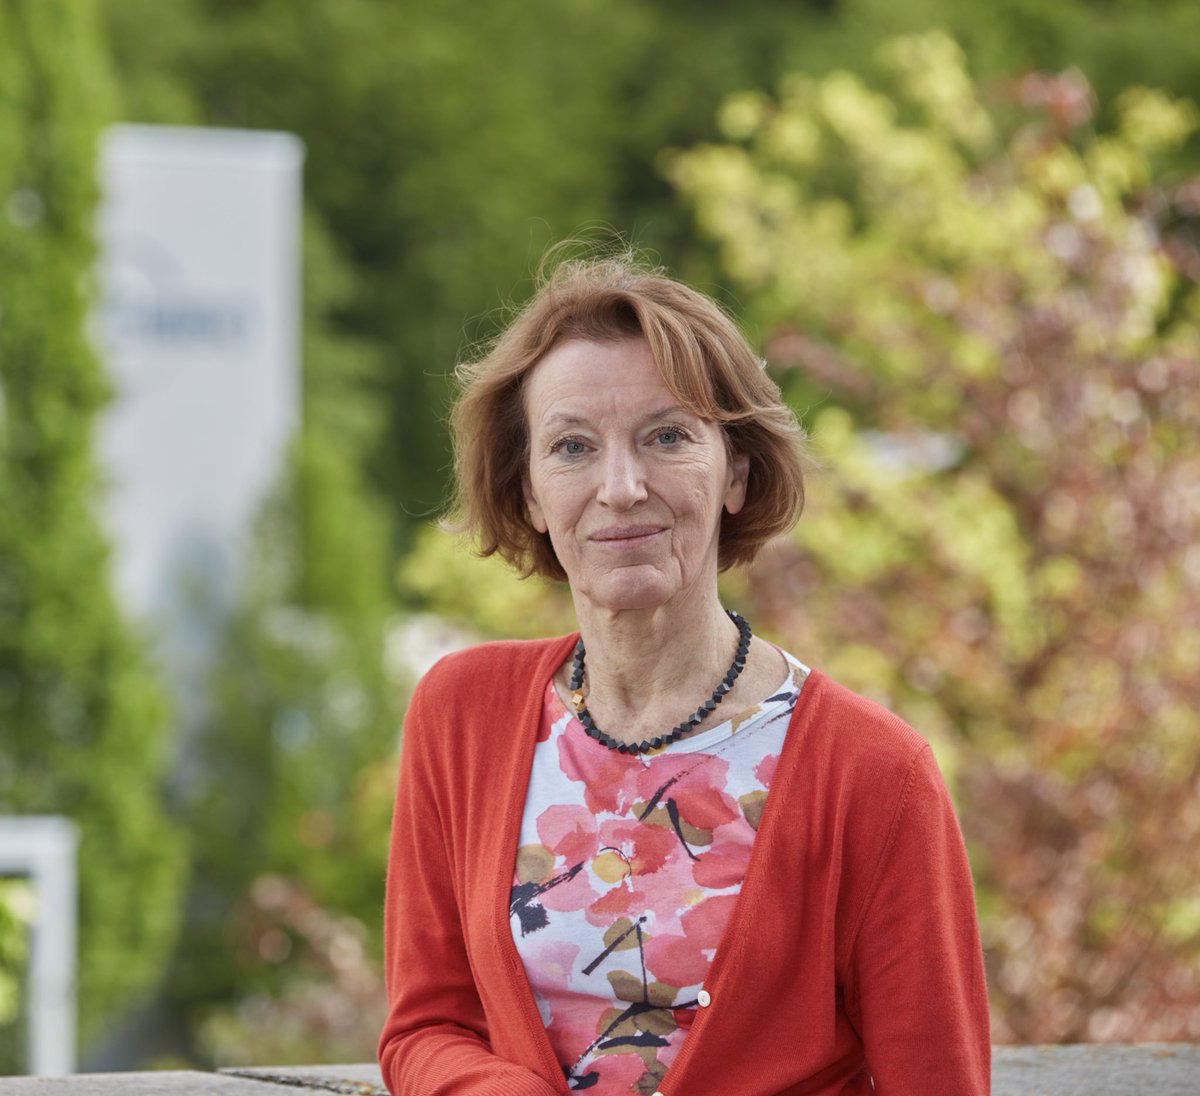 “The challenge is to try to get everyone to see that Europe needs to put more money into basic research”, says Maria Leptin @mleptin just ahead of taking the helm of the European Research Council.👇